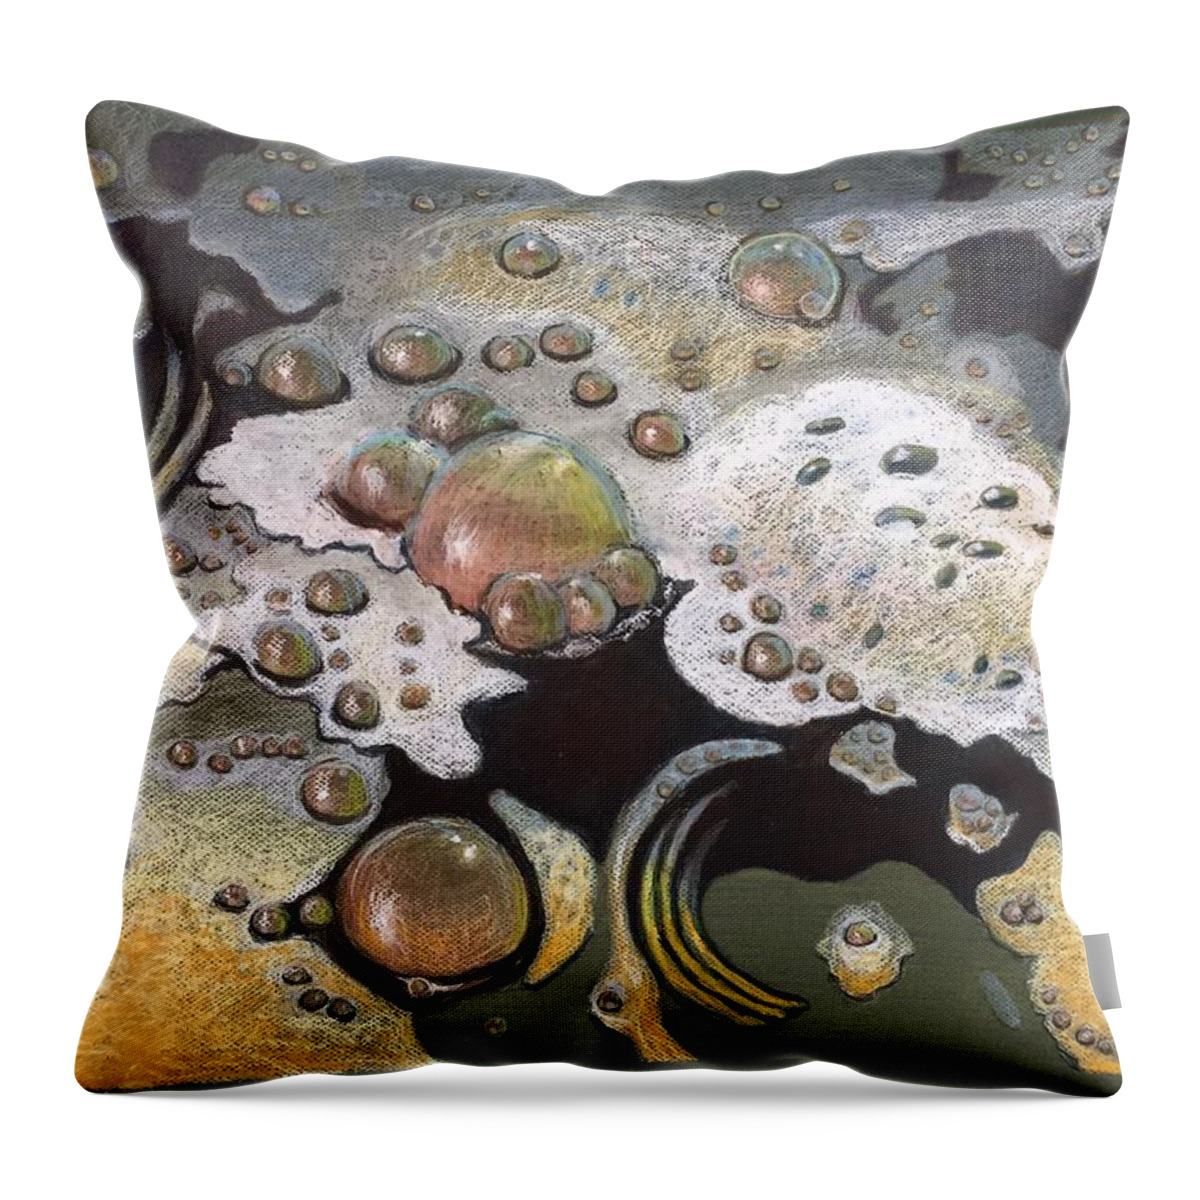 Sandra Hansen Throw Pillow featuring the drawing Bubble, Bubble, Toil and Trouble 2 by Art Nomad Sandra Hansen